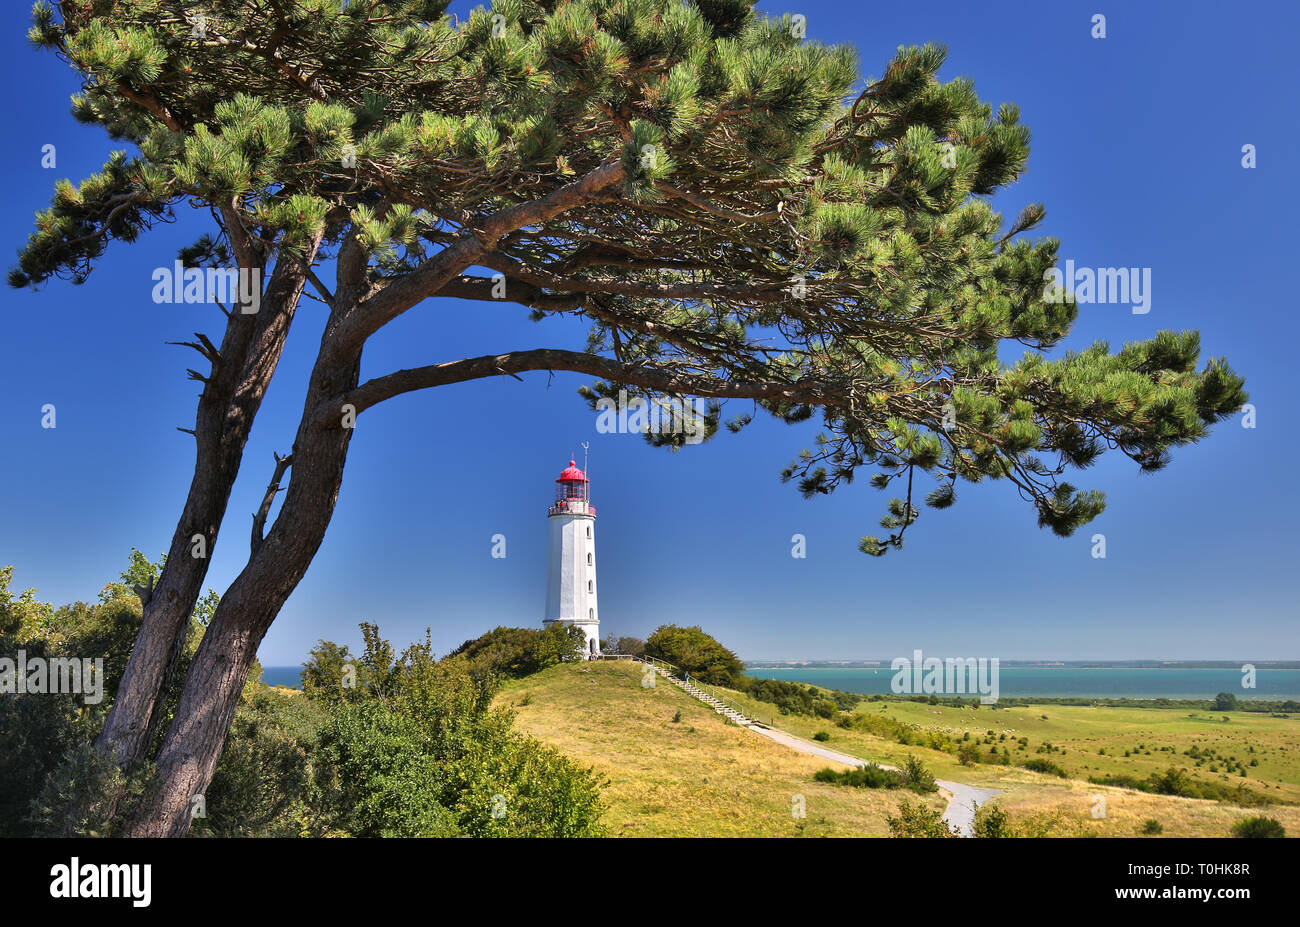 Lighthouse vicino a Kloster (isola di Hiddensee - Germania) - immagine HDR Foto Stock